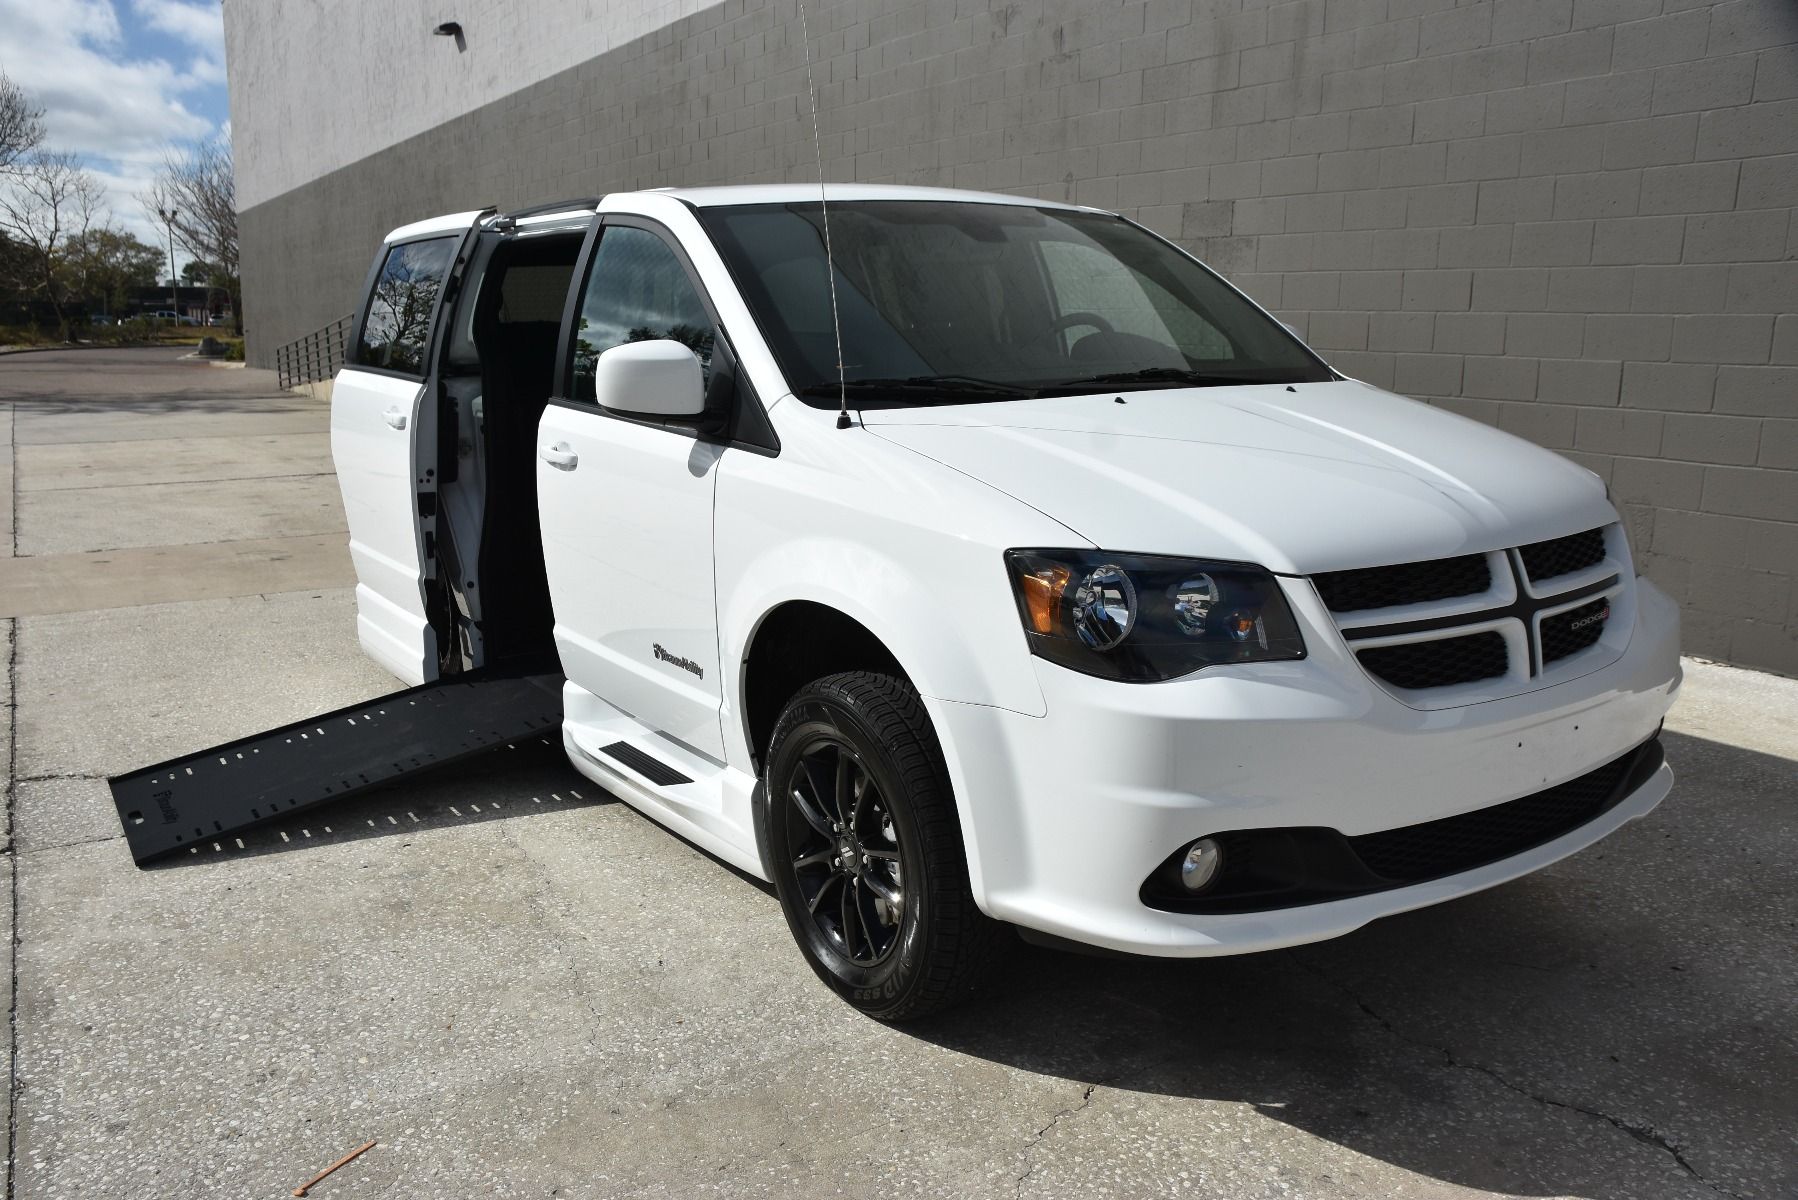 White 2020 Dodge Grand Caravan Wheelchair Van with ramp deployed, as seen from passenger side front angle.